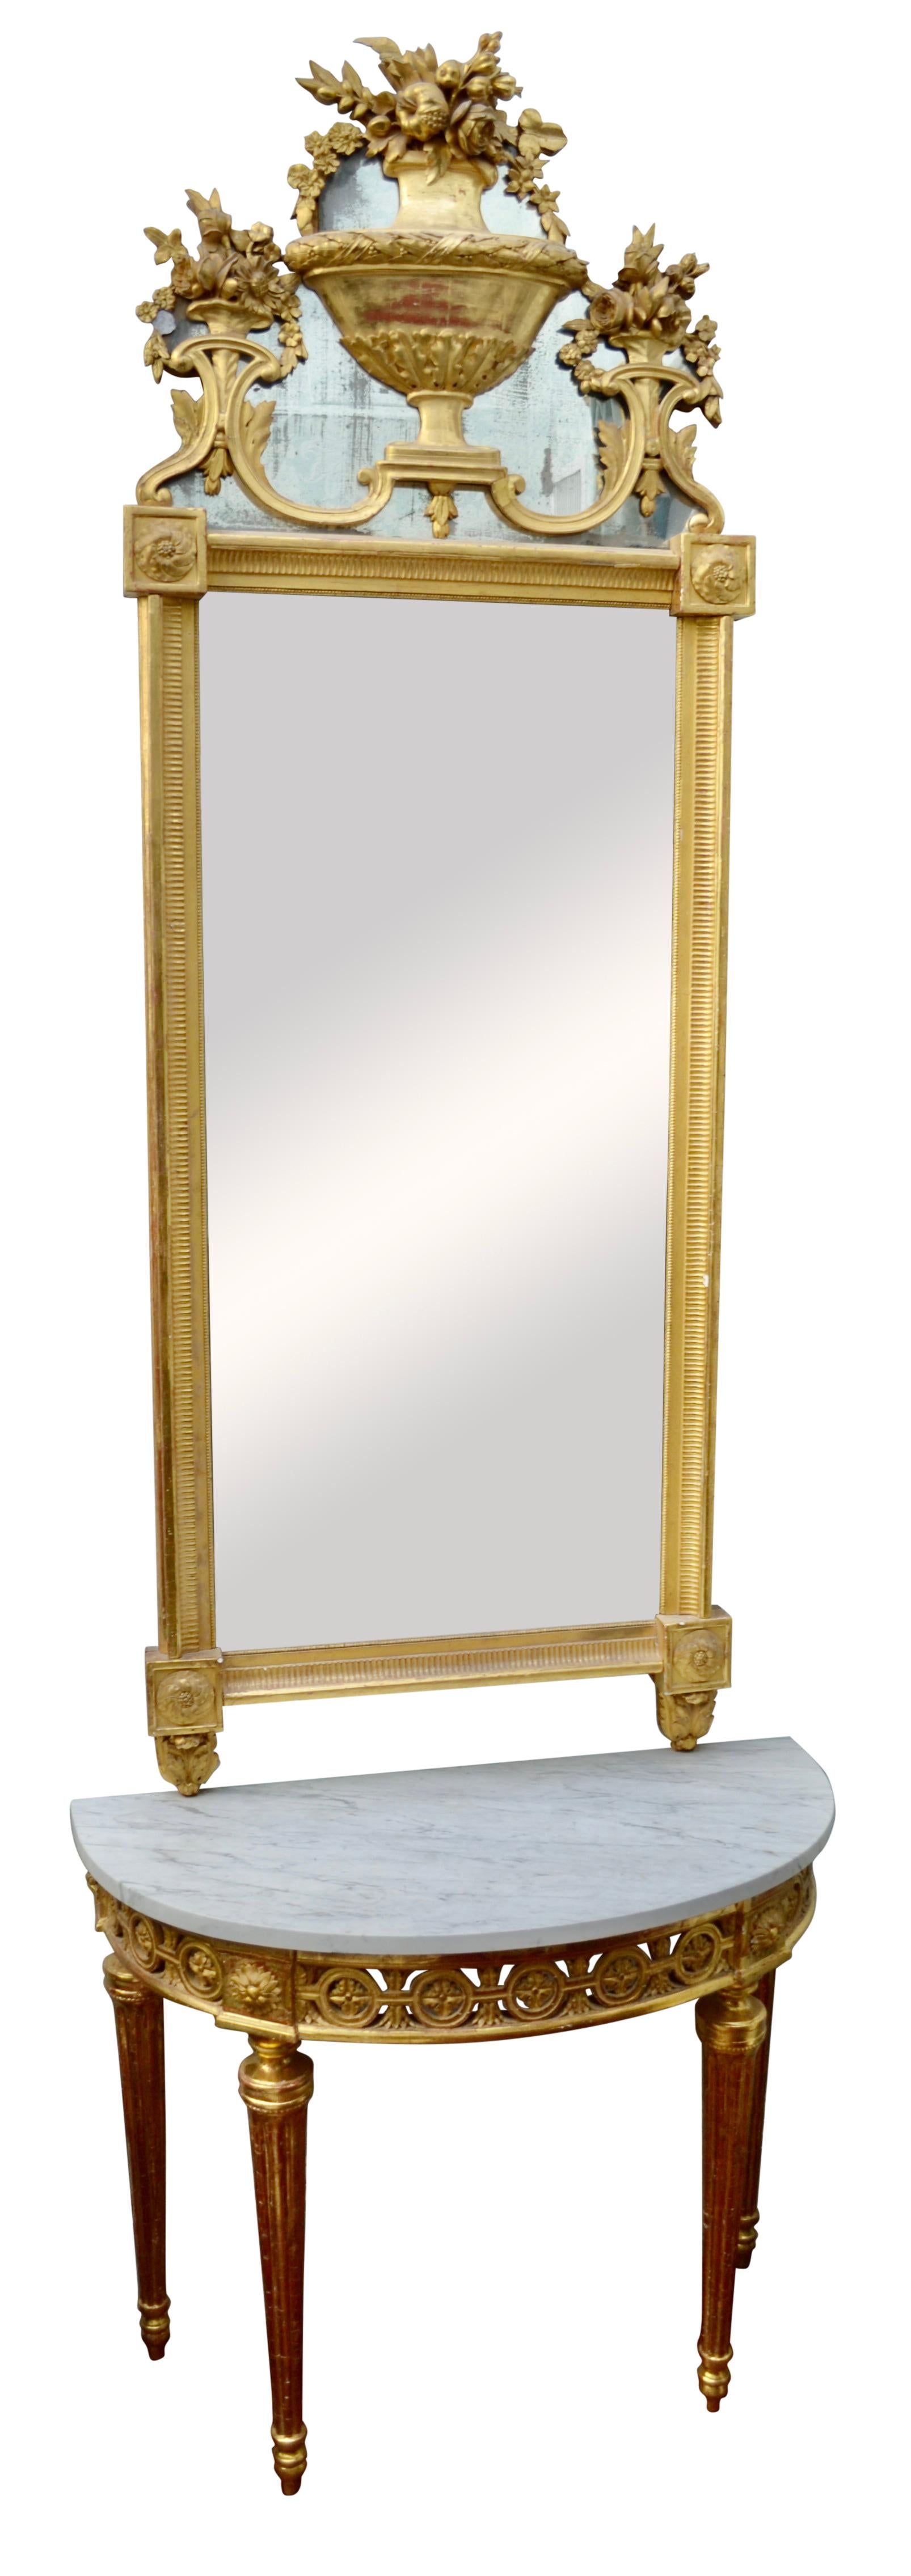 Late 18th Century Italian Giltwood Mirror and Demilune Console For Sale 5